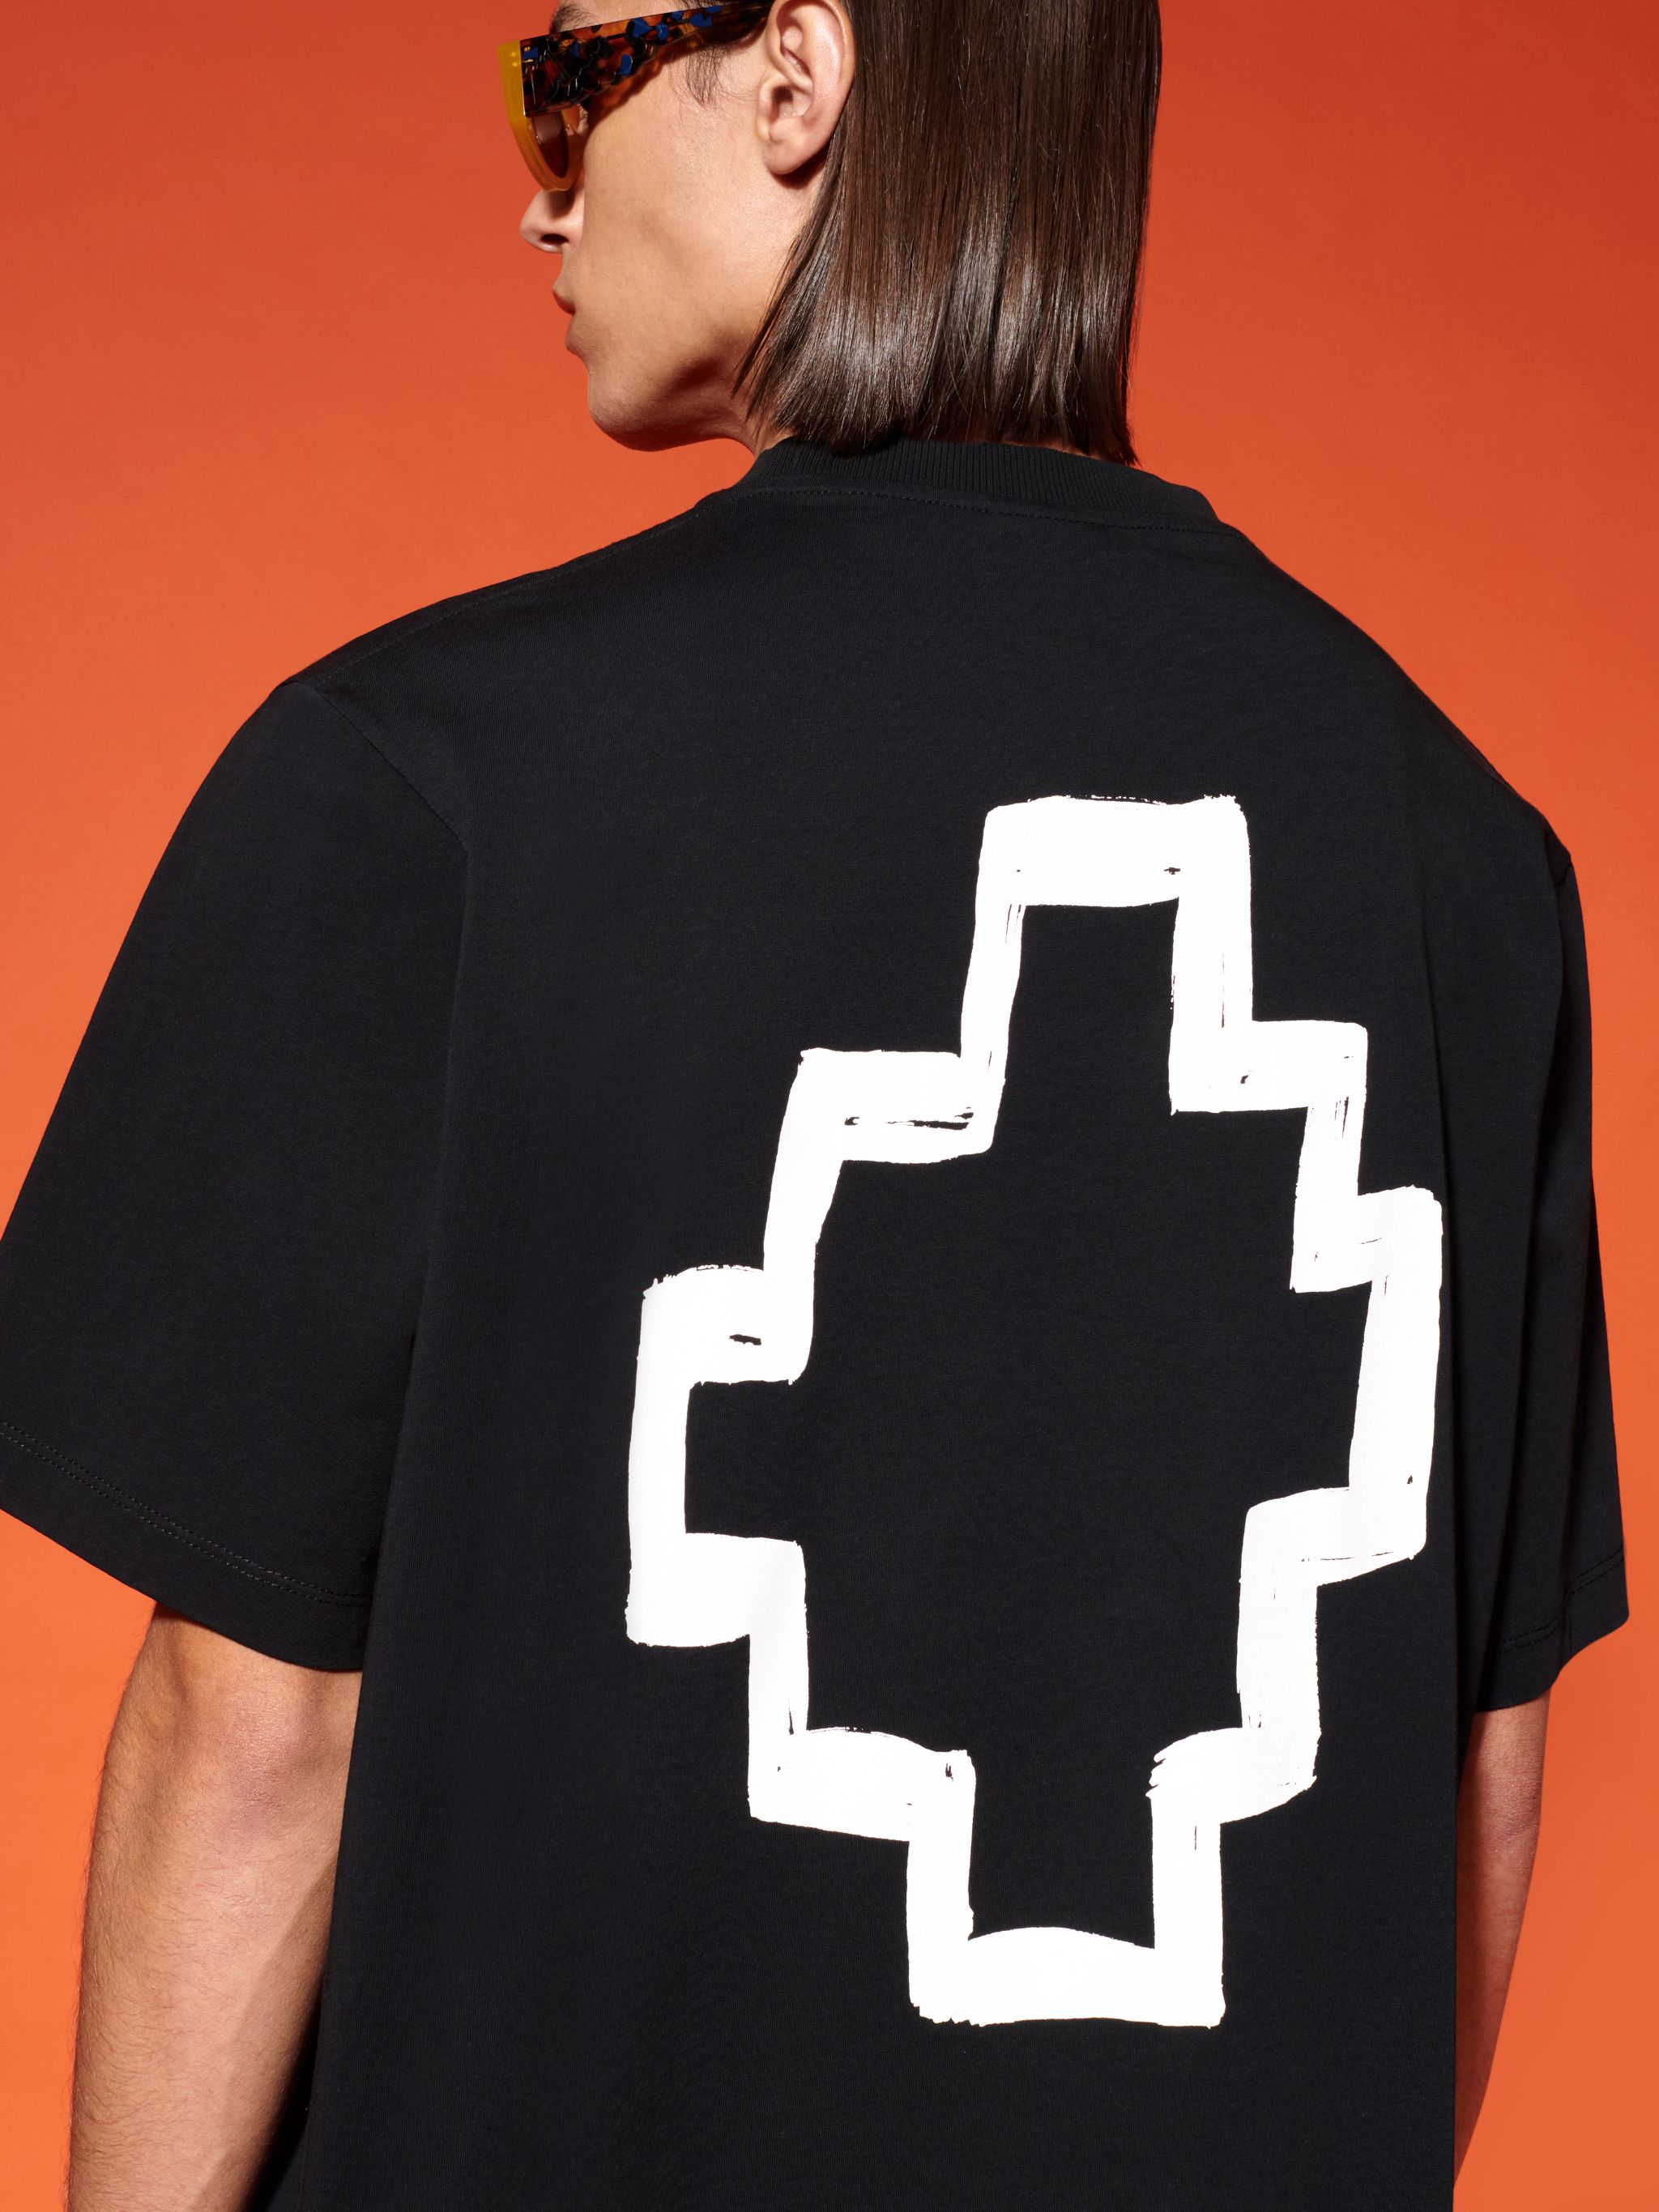 Black/white organic cotton Tempera Cross-print T-shirt from Marcelo Burlon County of Milan featuring signature Cross motif, logo print at the chest, crew neck, short sleeves and straight hem. When buying this unisex item, keep in mind that it is graded in standard men's sizing.. Conscious: This item is made from at least 50% organic materials.